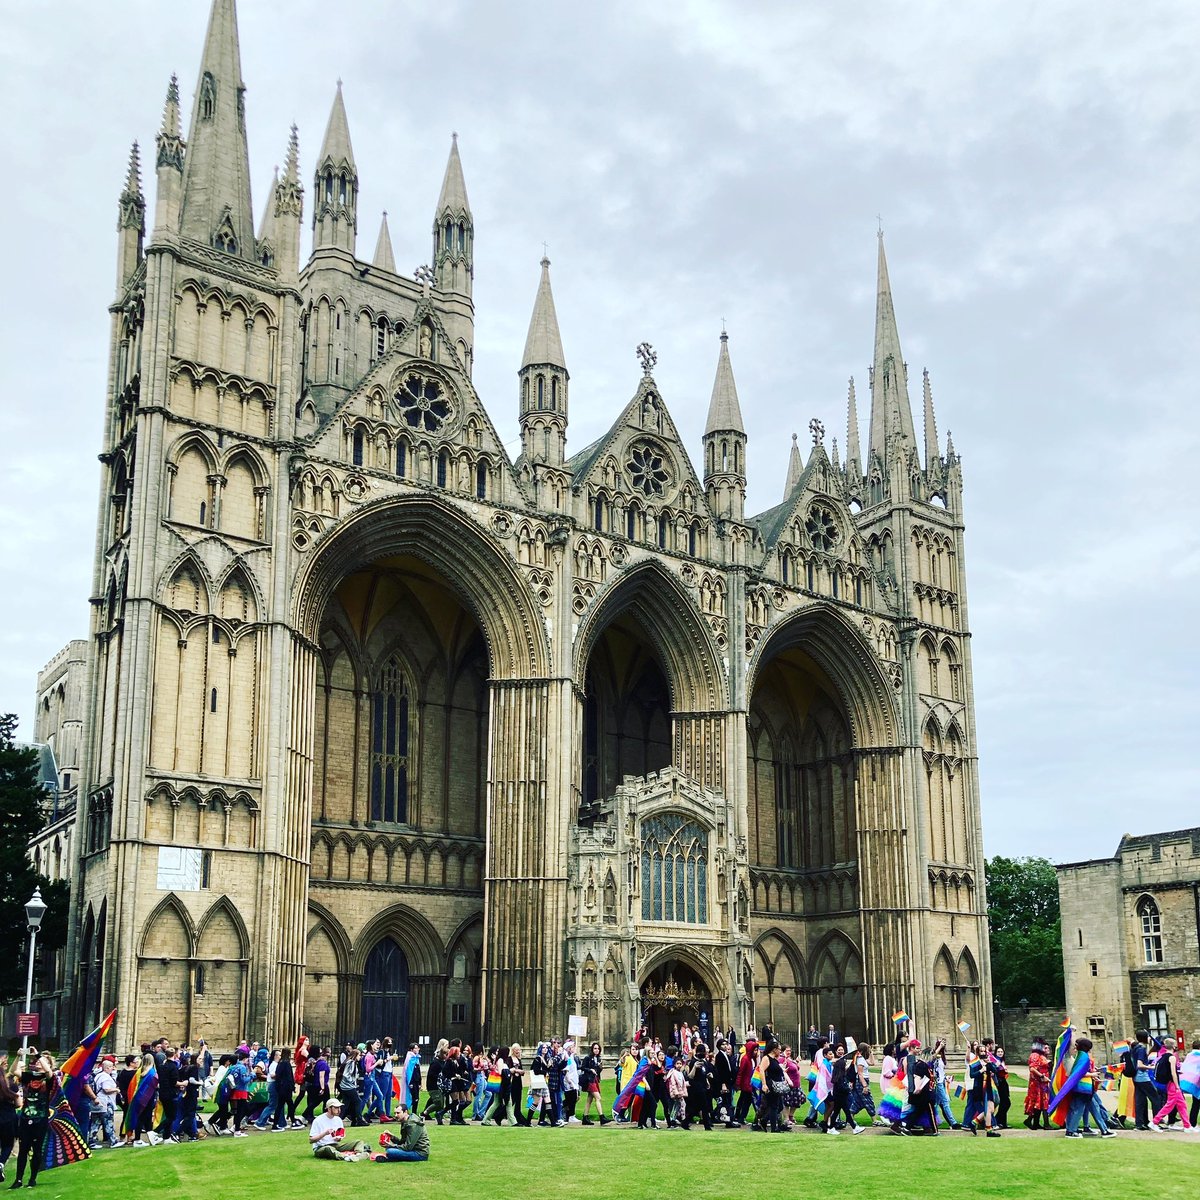 The parade has reached Cathedral Square and the street party is about to start @PeterbPrideUK! We’re in the info point (on the cathedral side of the square) with stickers and info about our services. Alongside @CambsLGBT!